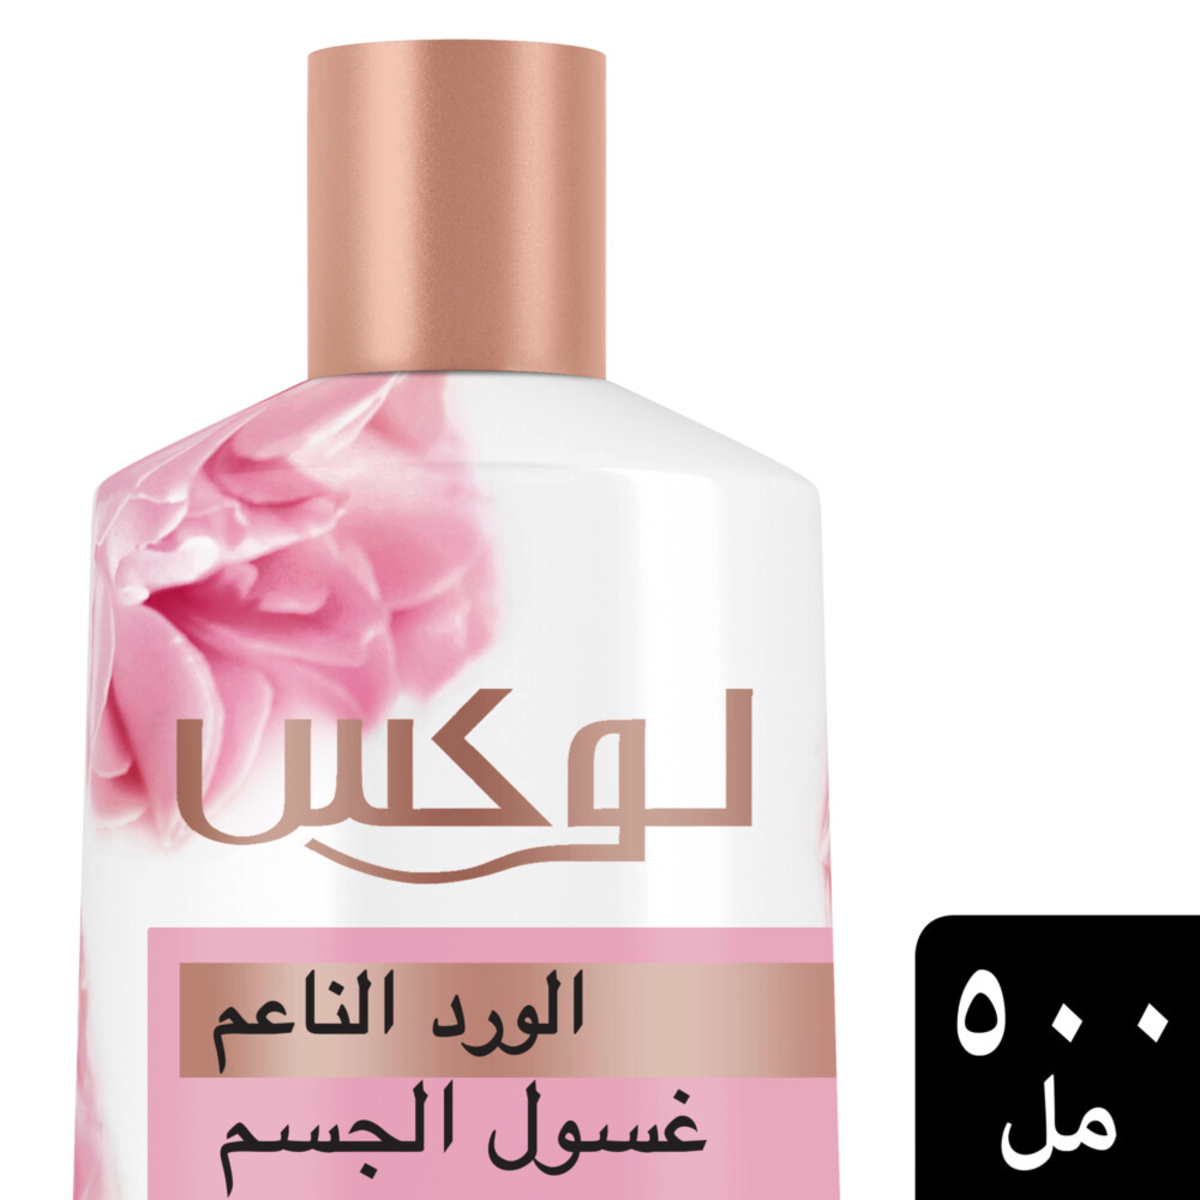 Lux Body Wash Soft Rose Delicate Fragrance 500 ml